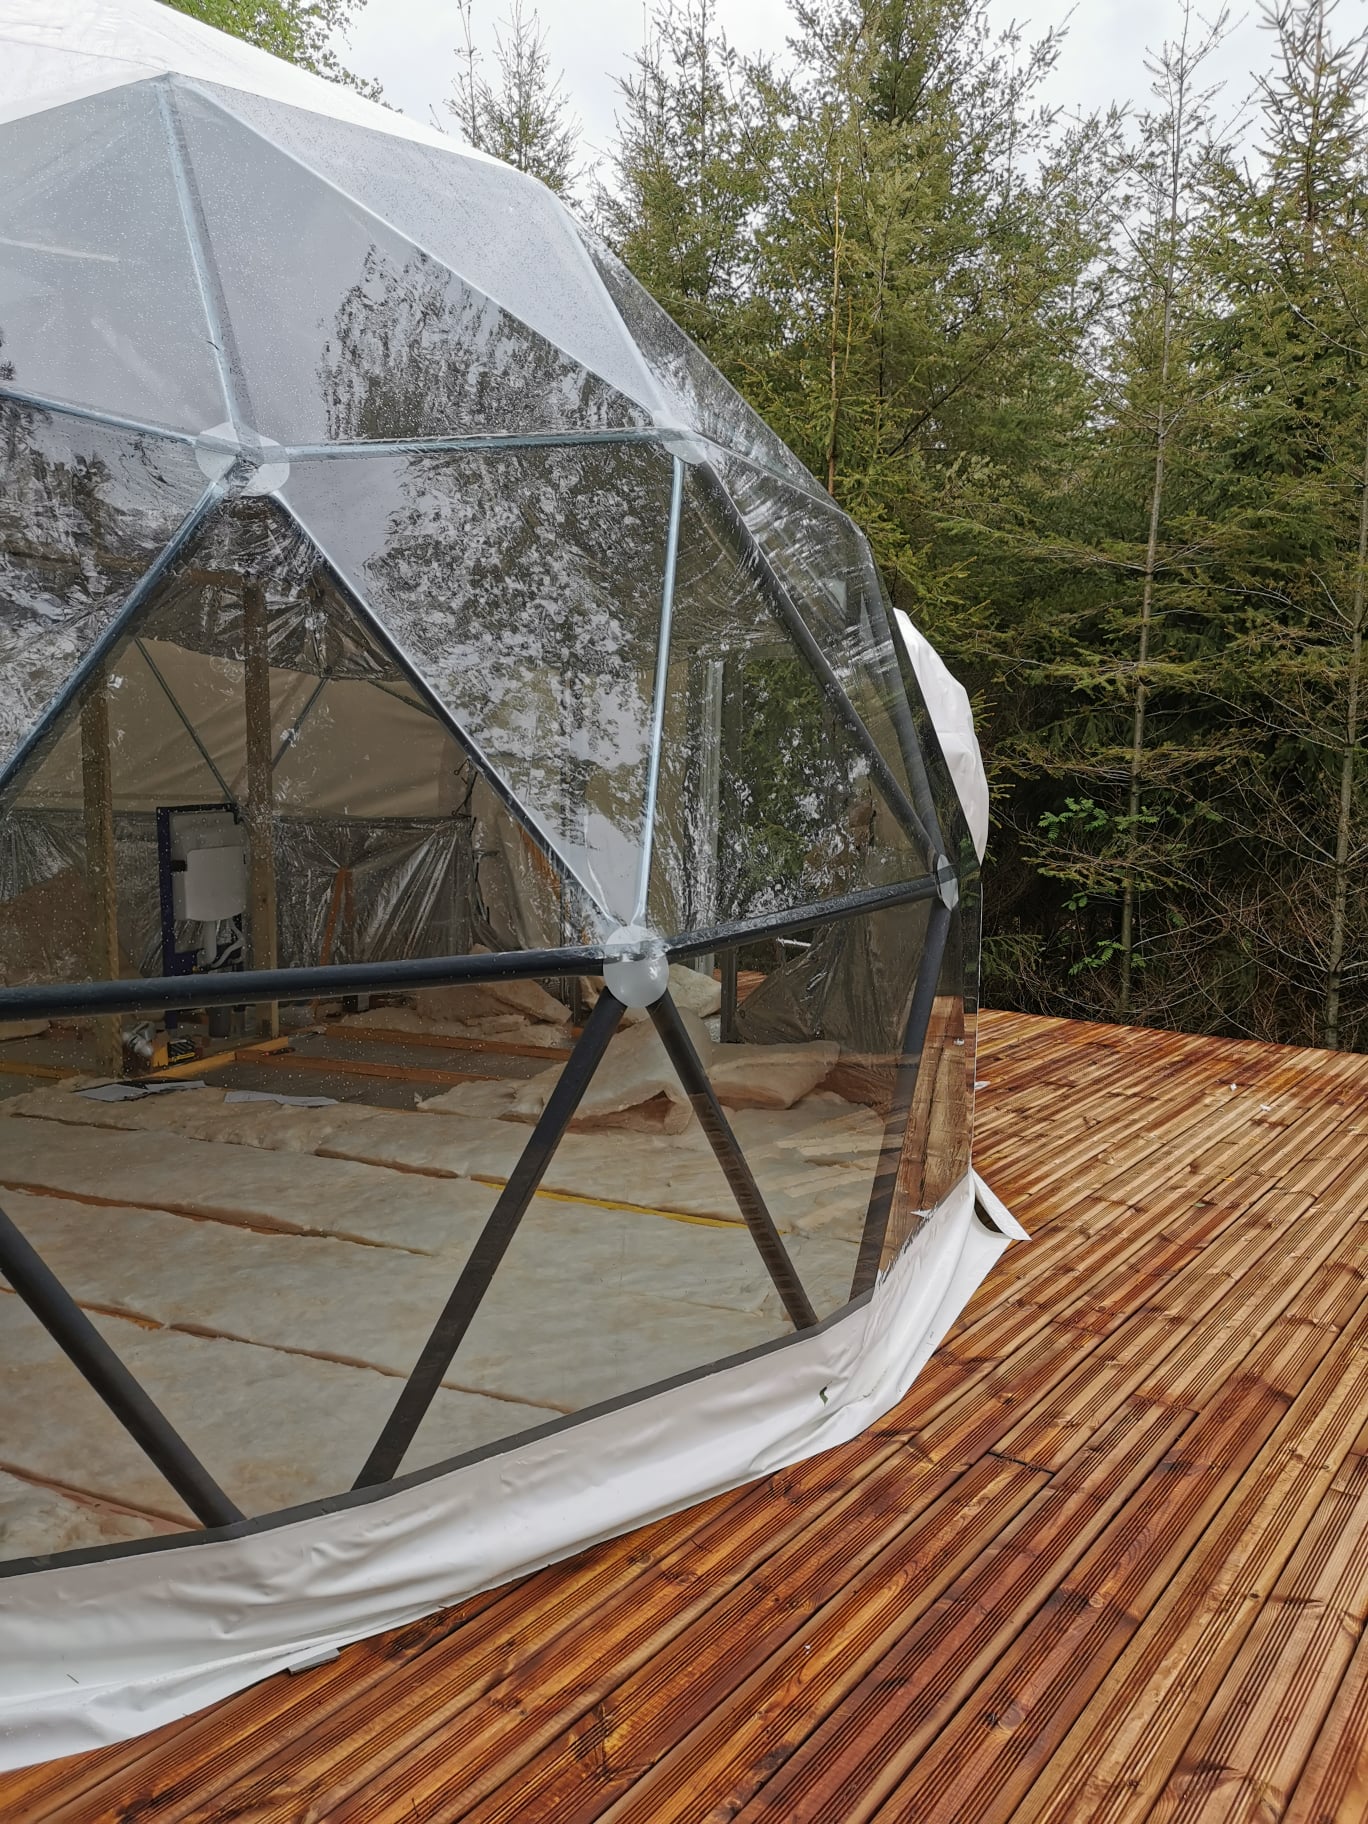 28m2 Glamping Dome Ø6m Domaine Ouréa / Eco-lodge & Spa FRANCE